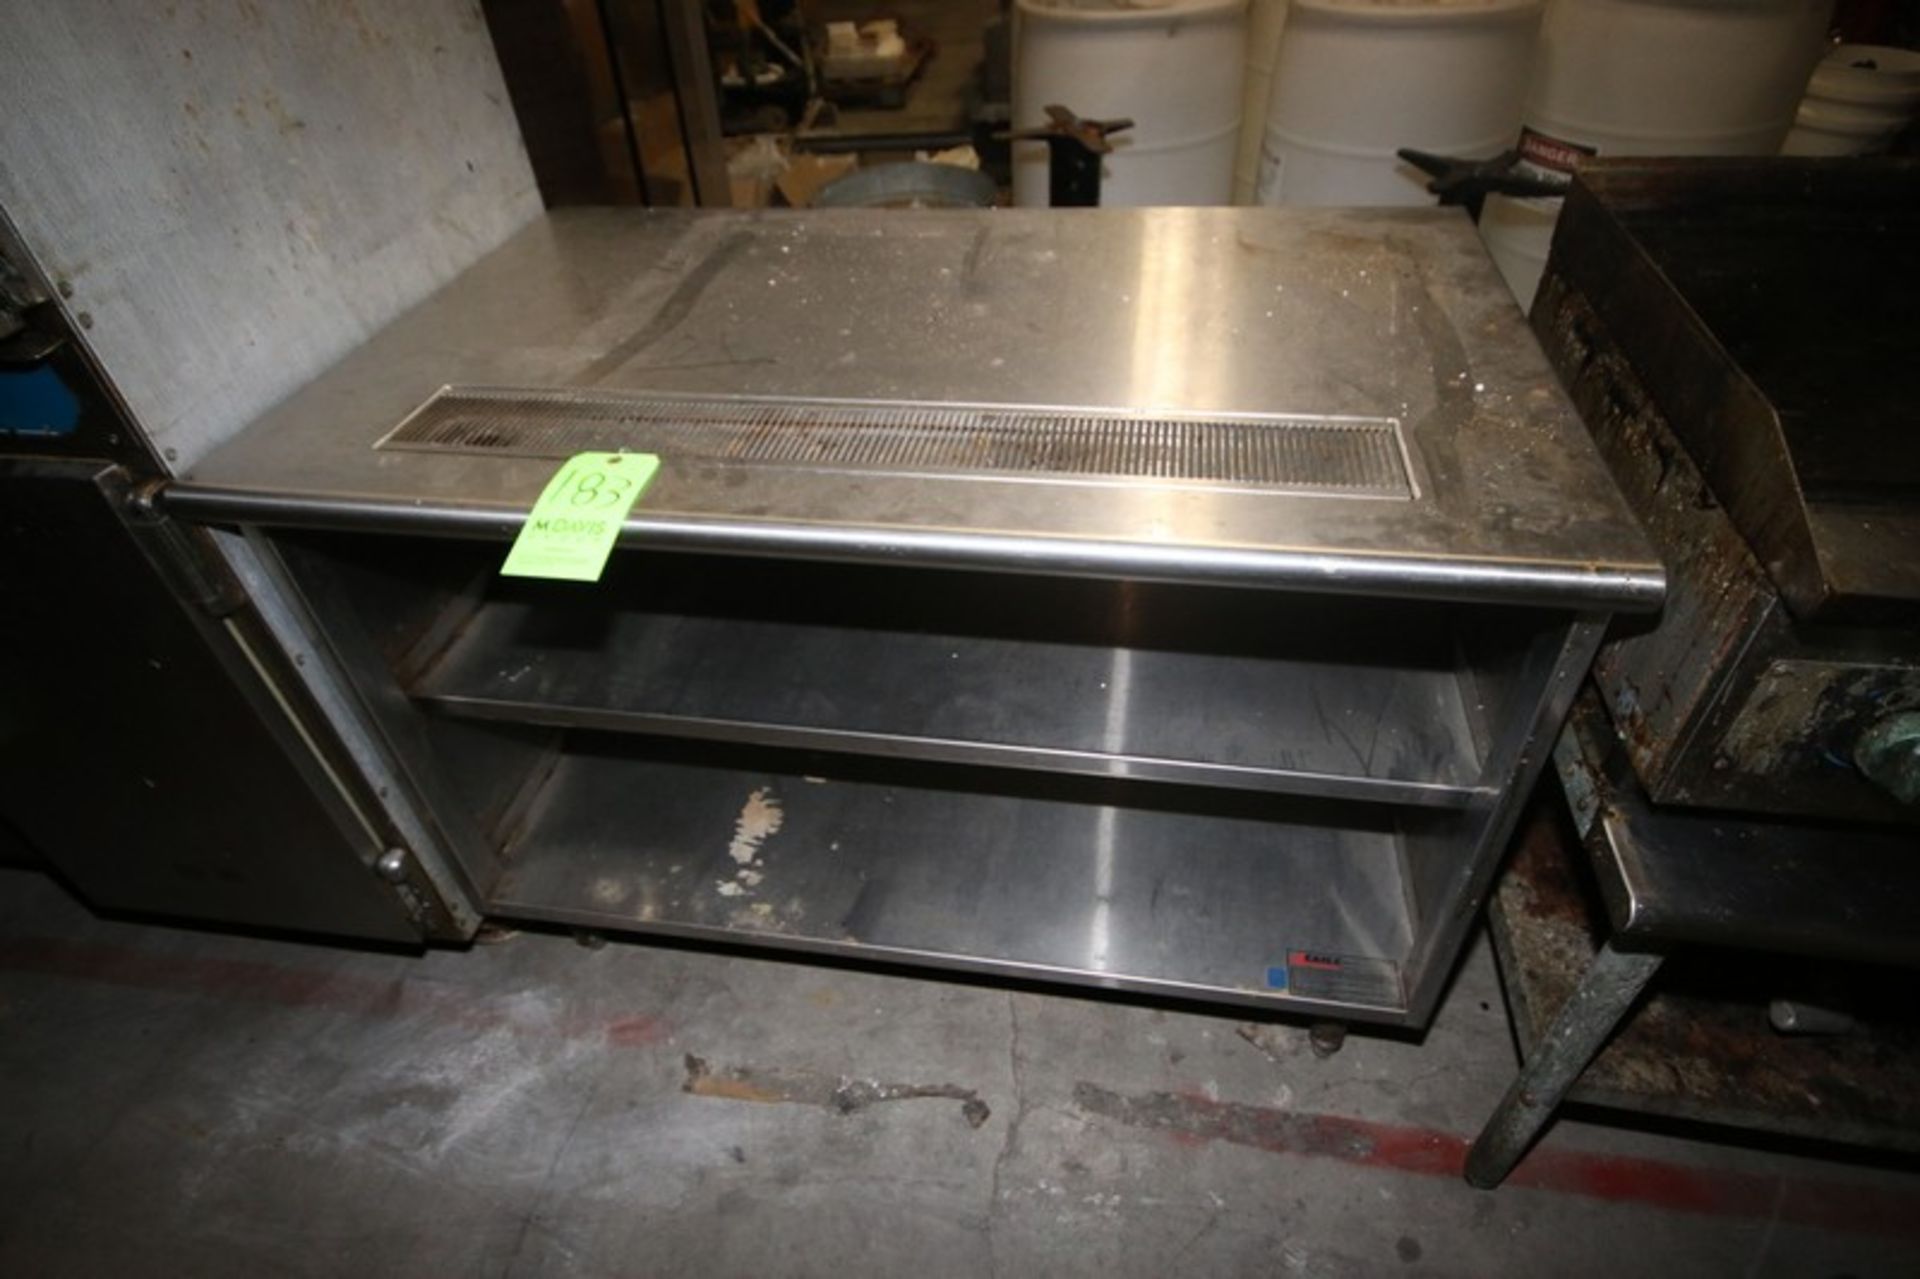 S/S Counter with Top Drain, Overall Dims.: Aprox. 48" L x 30" W x 35" H, with Bottom Shelves (